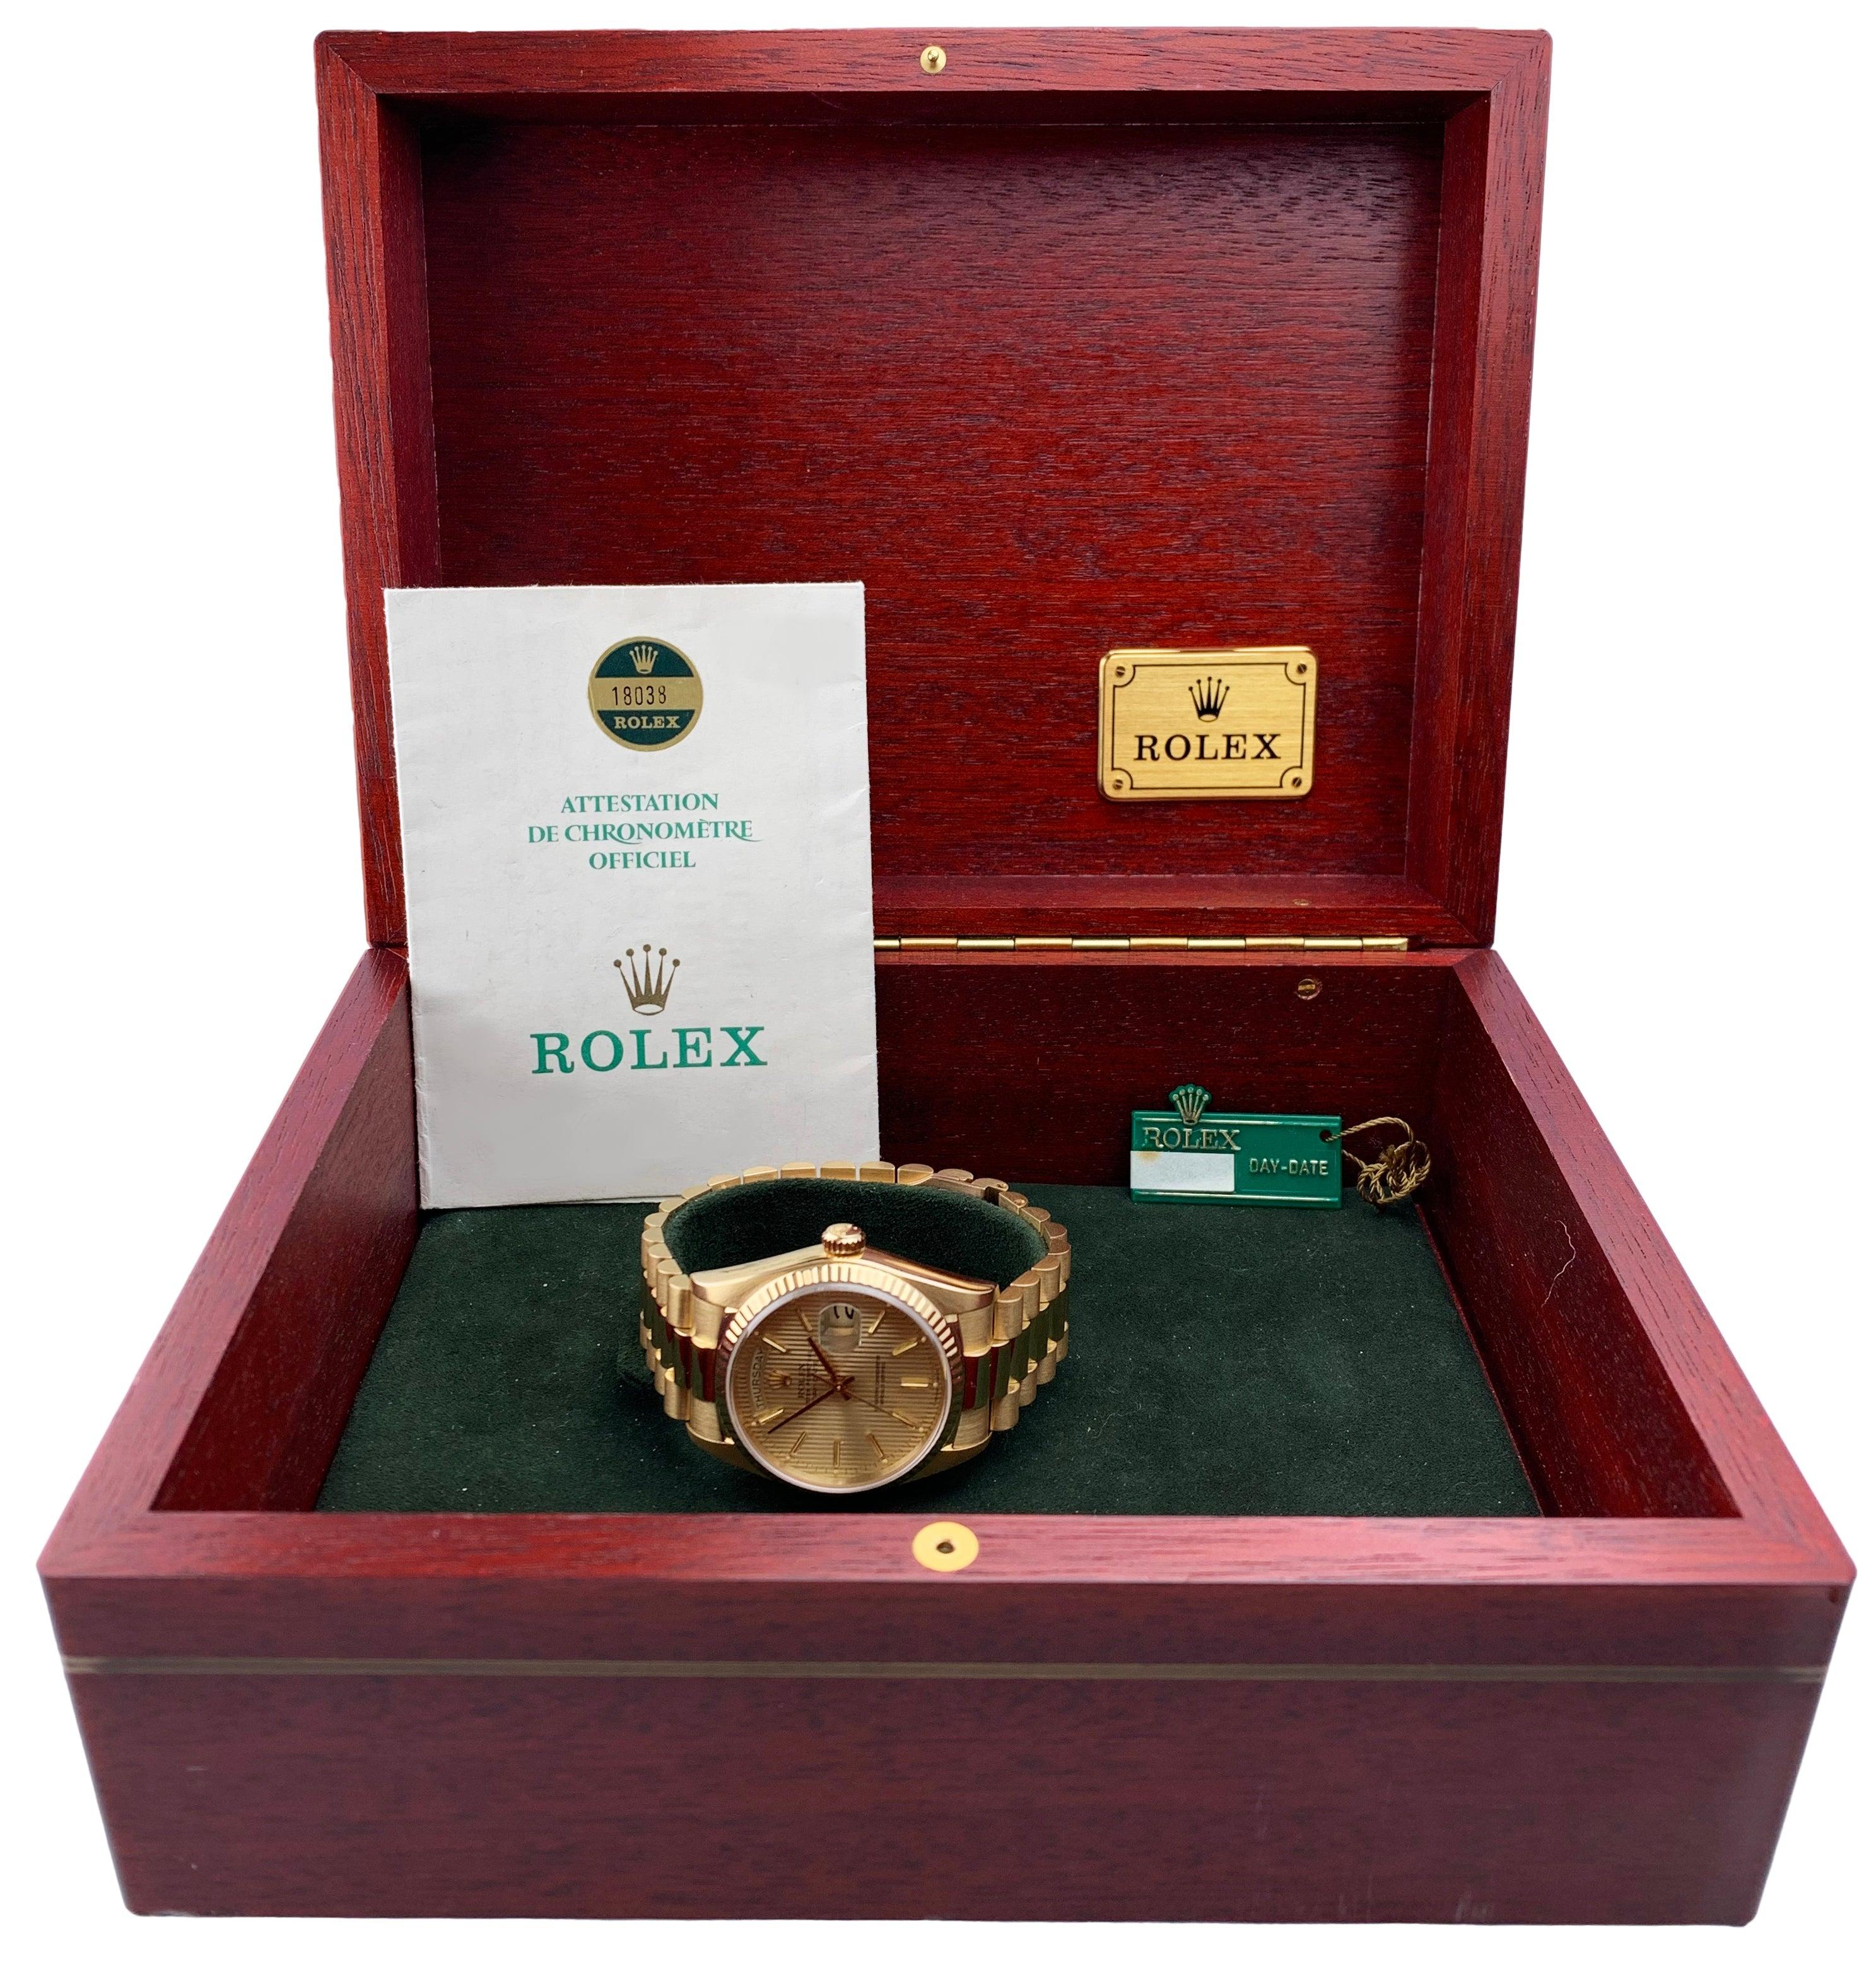 
Rolex Day-Date 18038 Men's Watch. 36mm 18k Yellow gold case with 18k yellow gold fluted bezel. Champagne tapestry dial with gold hands and index hour markers. Date display at the 3 o'clock position. Day display at the 12 o'clock position. 18k